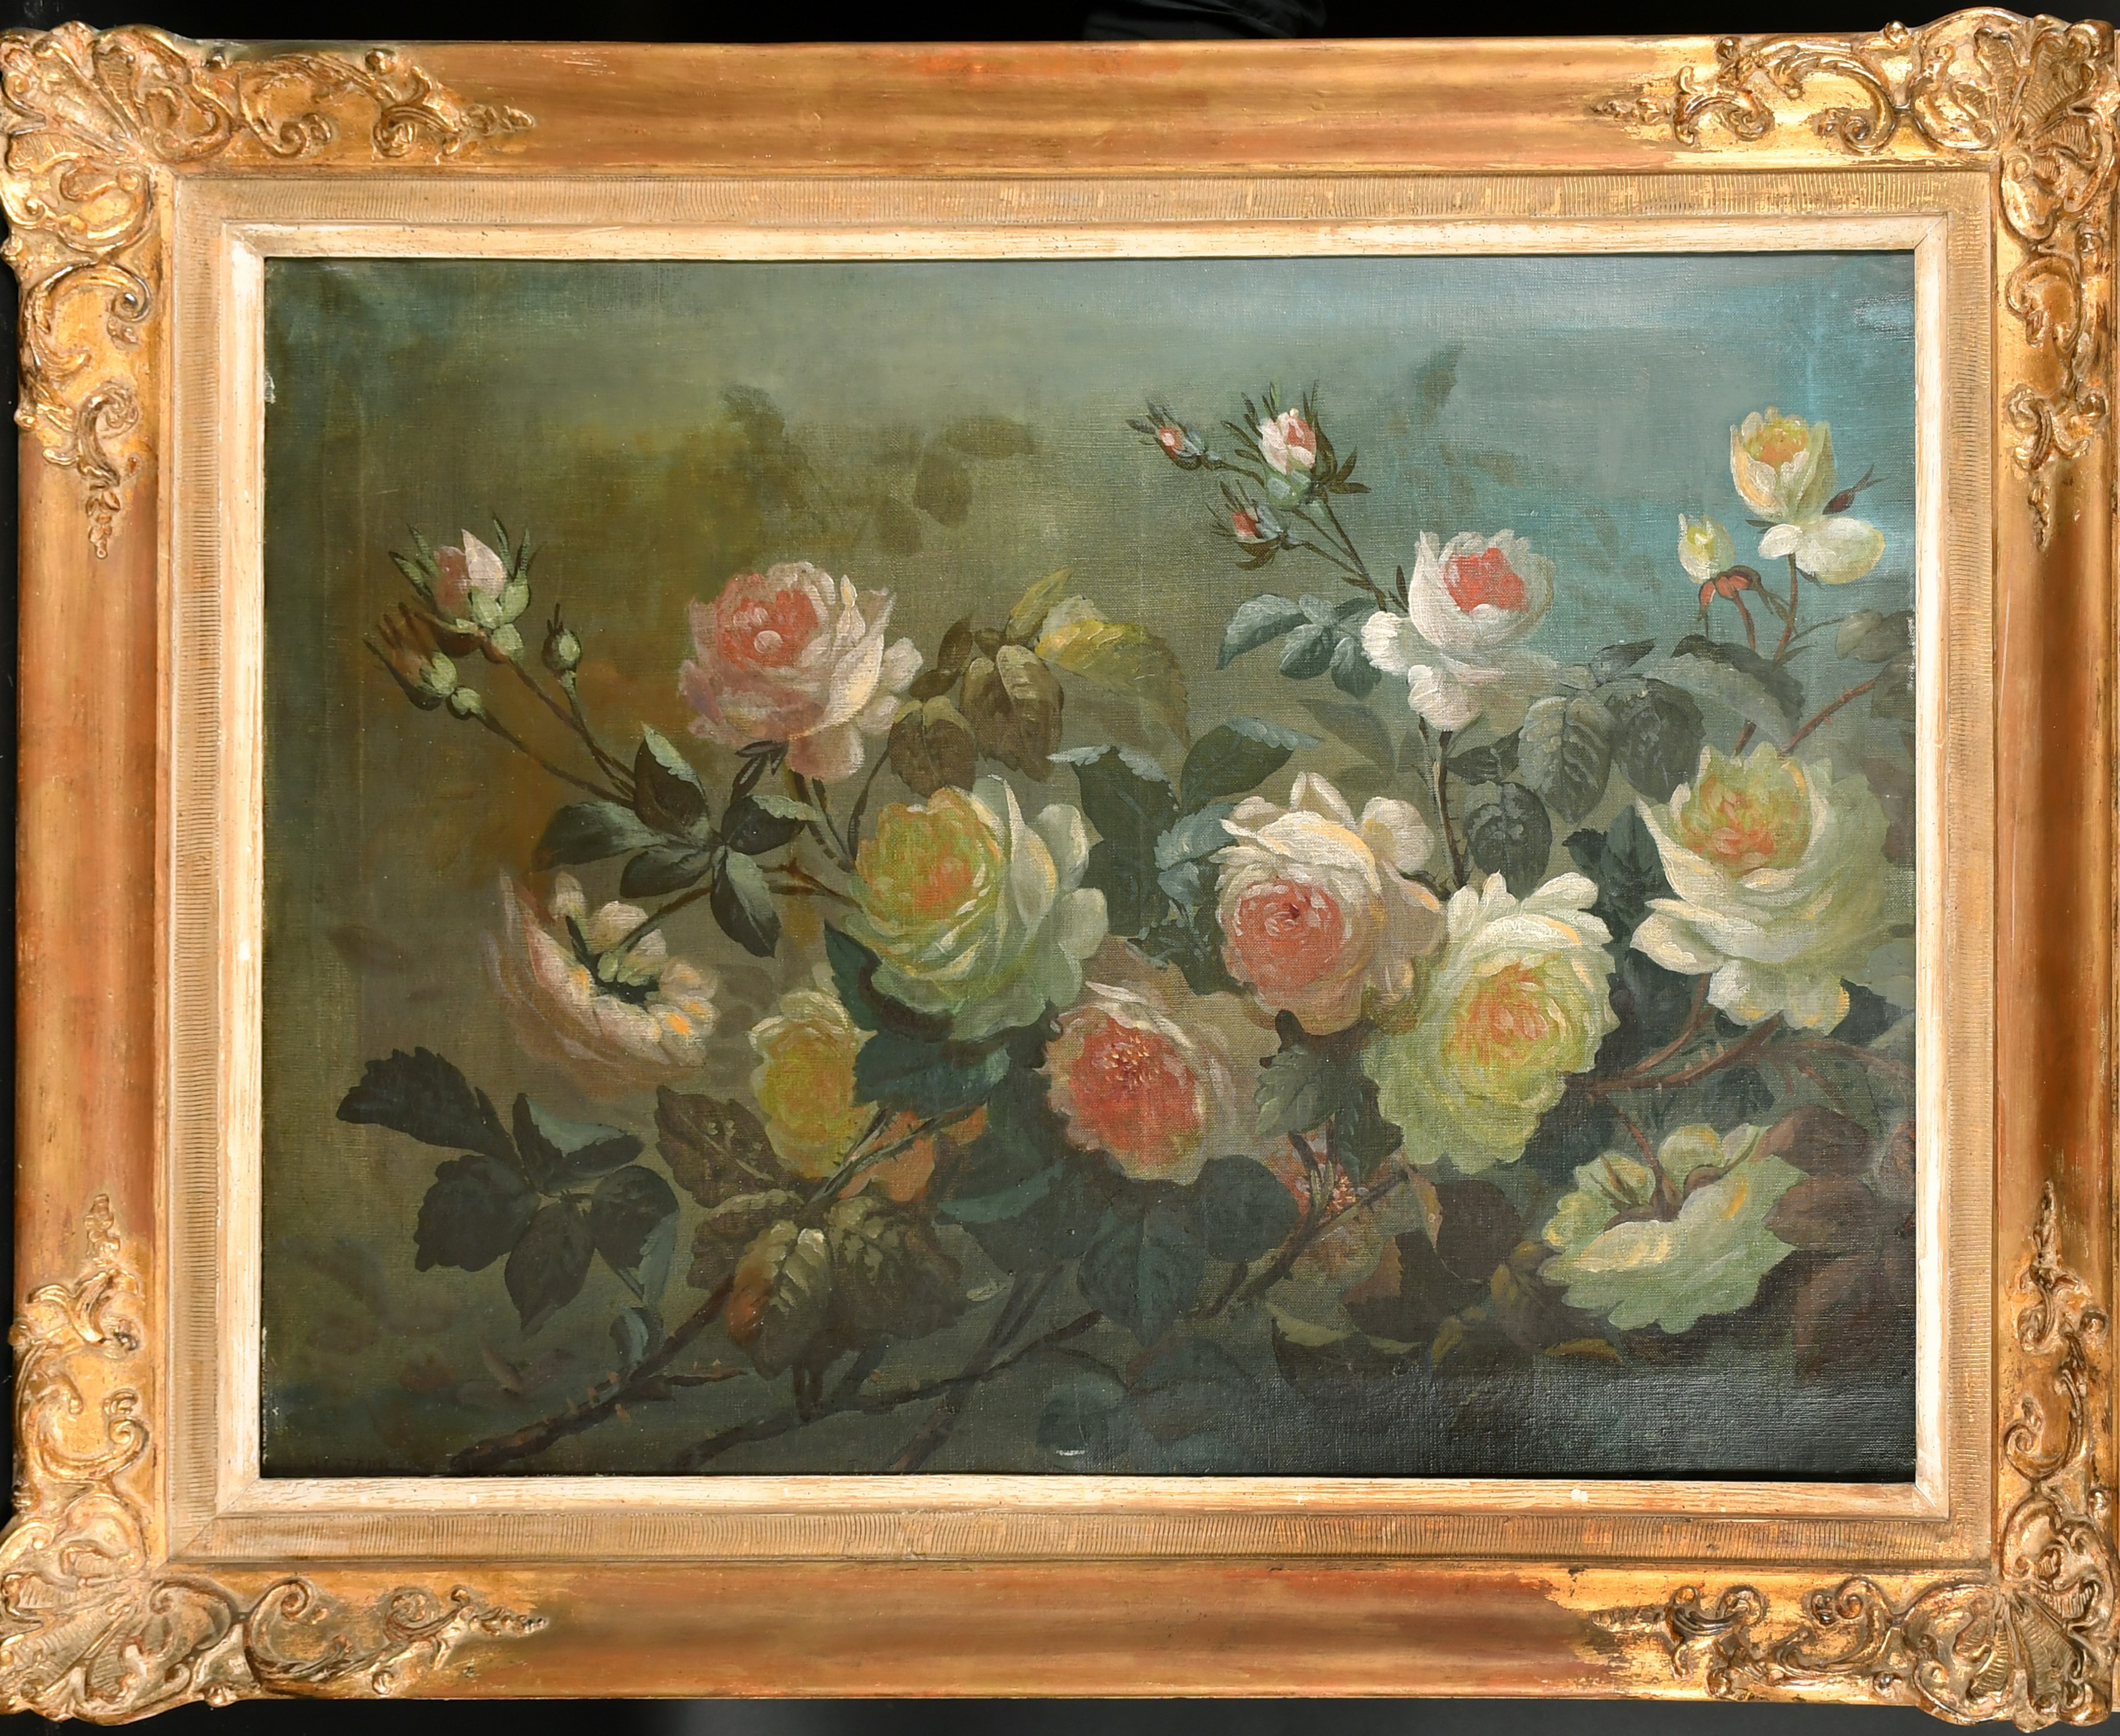 18th Century French School. Still Life of Flowers, oil on canvas, 21.75" x 28.5" (55.3 x 72.3cm) - Image 2 of 3